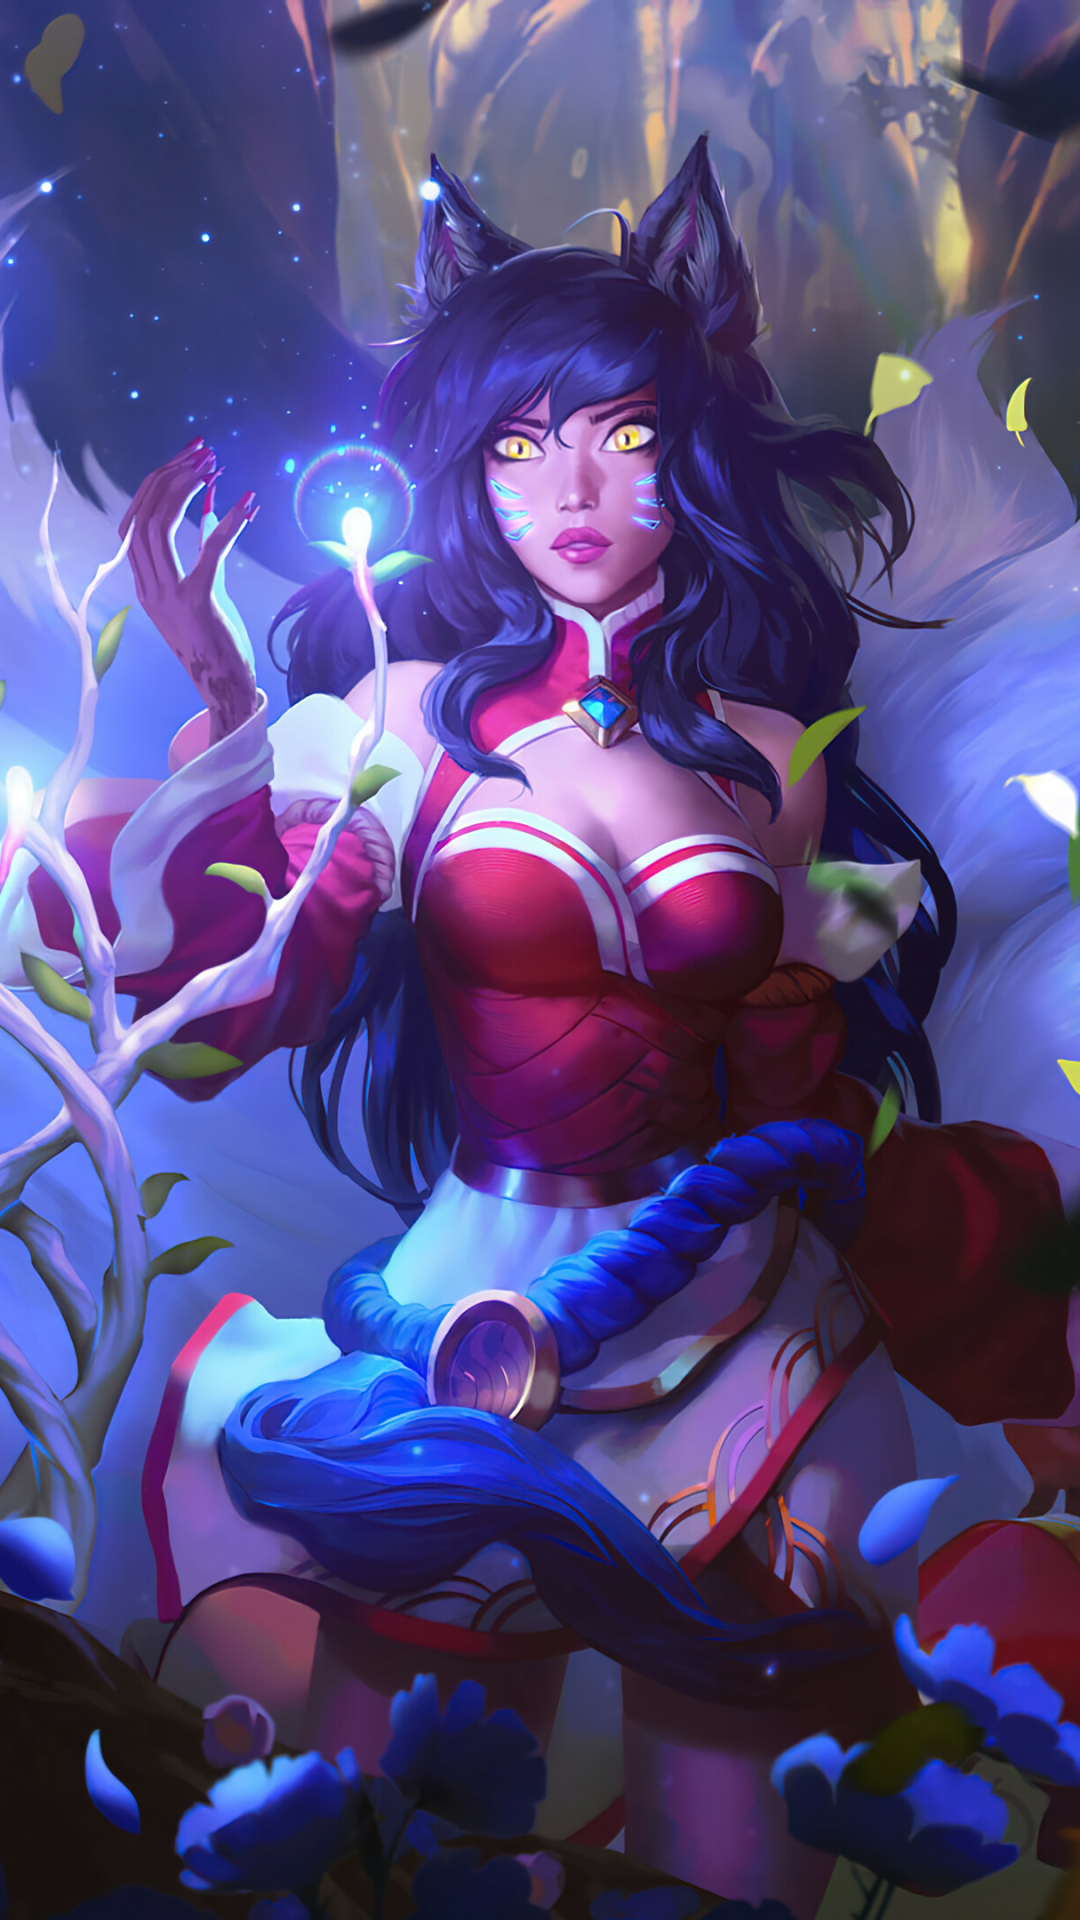 League Of Legends Phone Wallpaper - Mobile Abyss